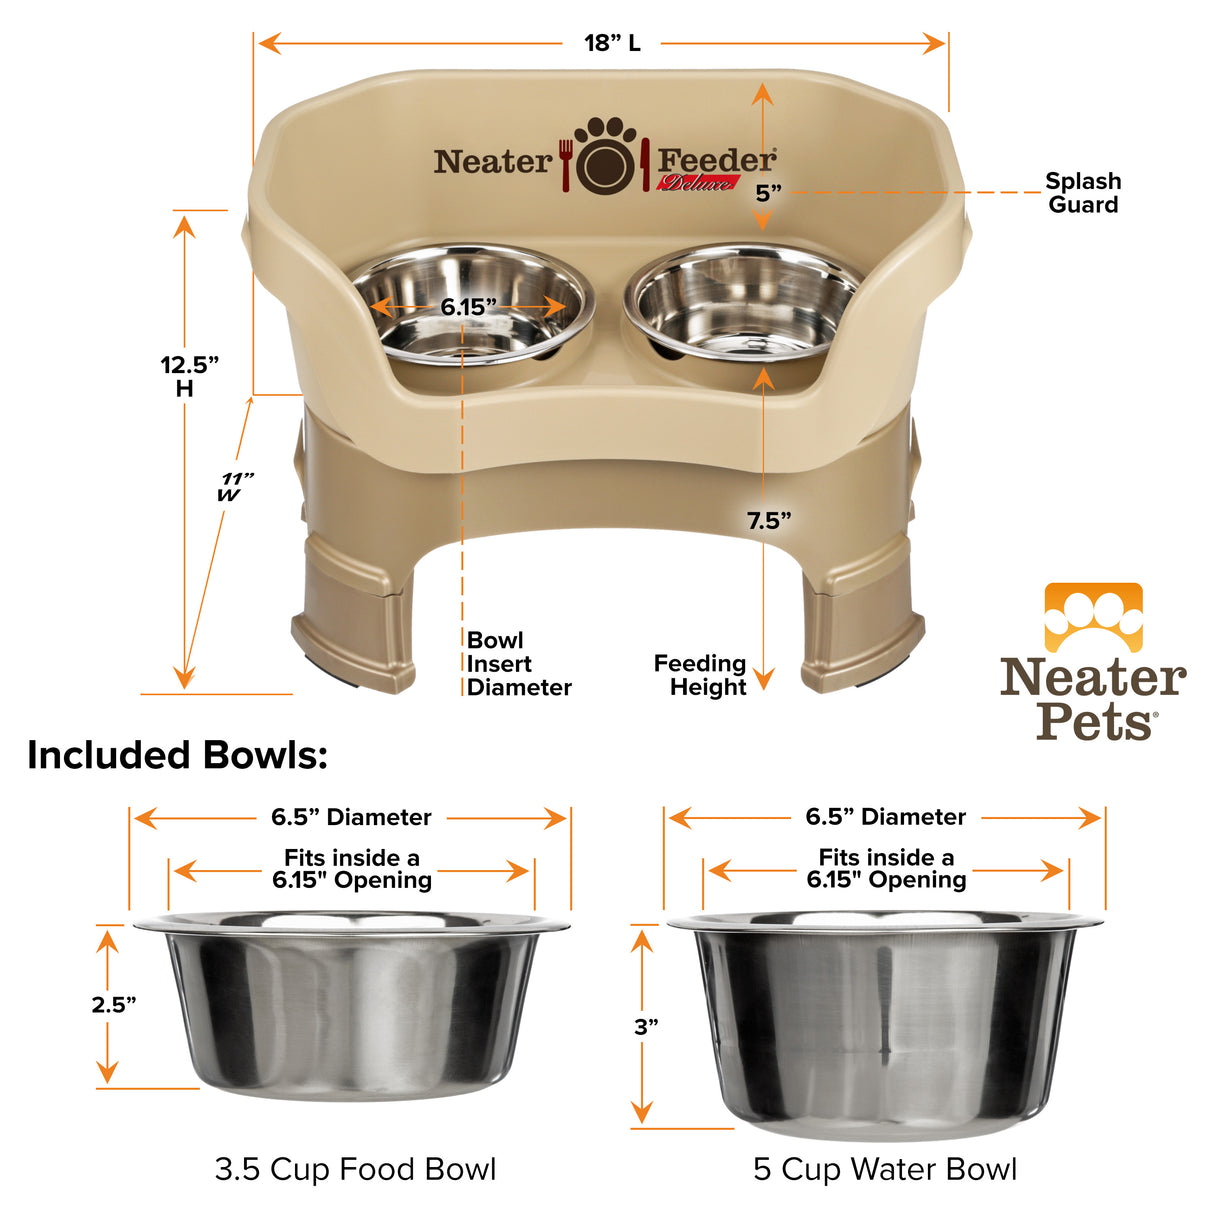 Neater Pet Brands Big Bowl with Leg Extensions Huge Jumbo Trough Style Dog Pet Water Dish (1.25 Gallons, Champagne)